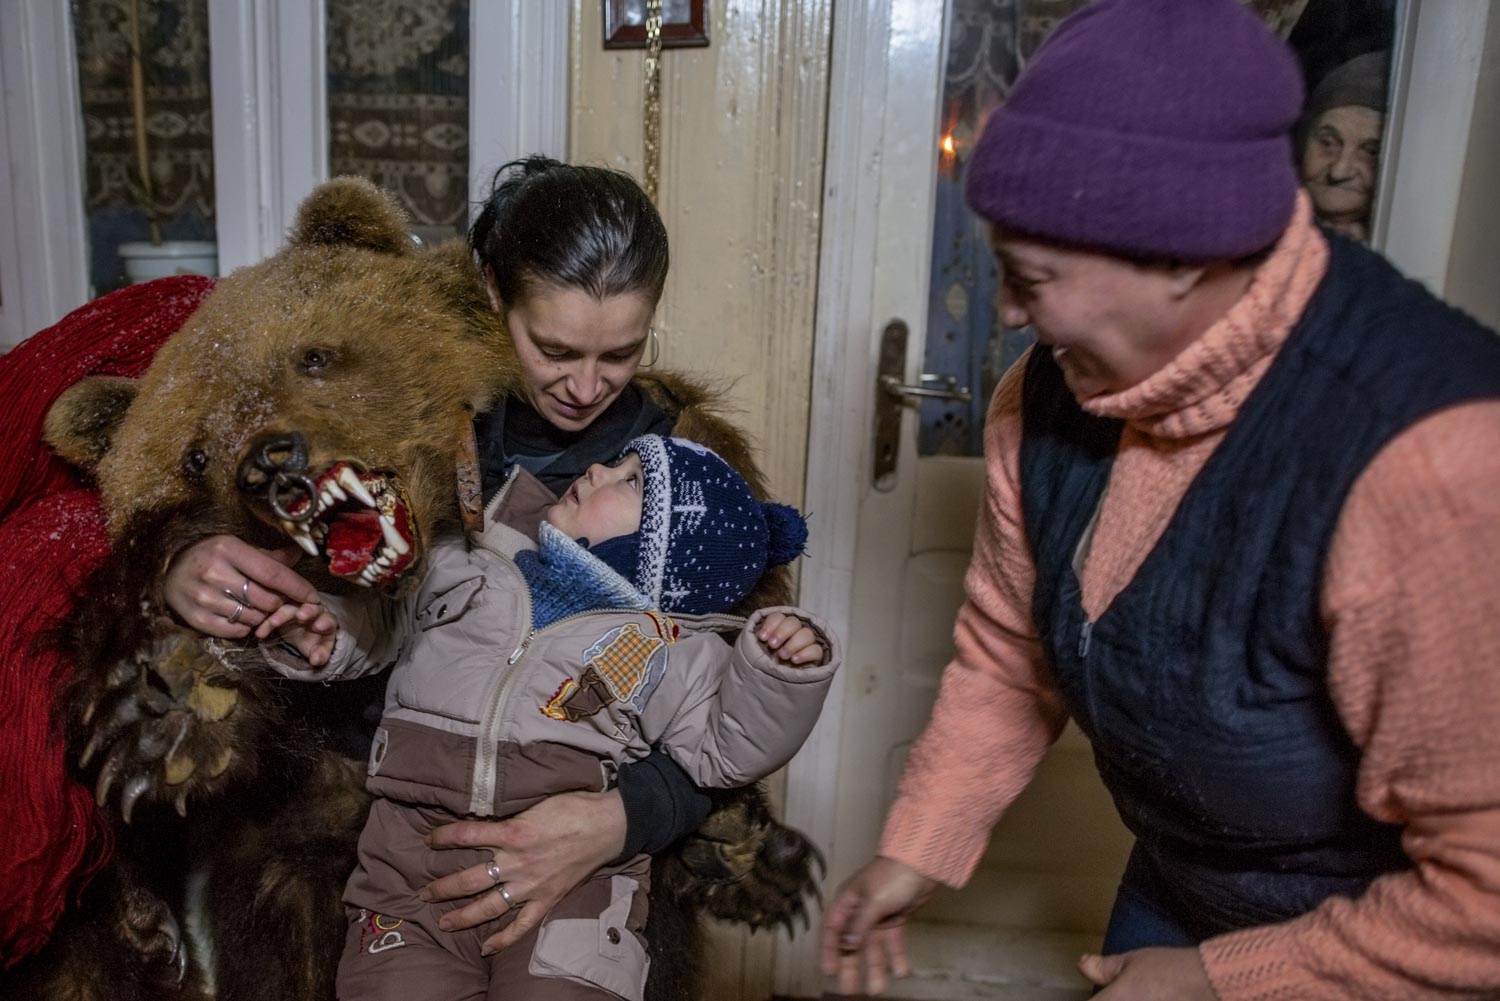  A lady bear in Toloaca's troupe plays with the young son of Cătălin Apetroaie, a bear dancer himself, after a performance at Apetroaie's home. The child's grandmother scurries by while his great-grandmother peers from inside the house.  December 28,